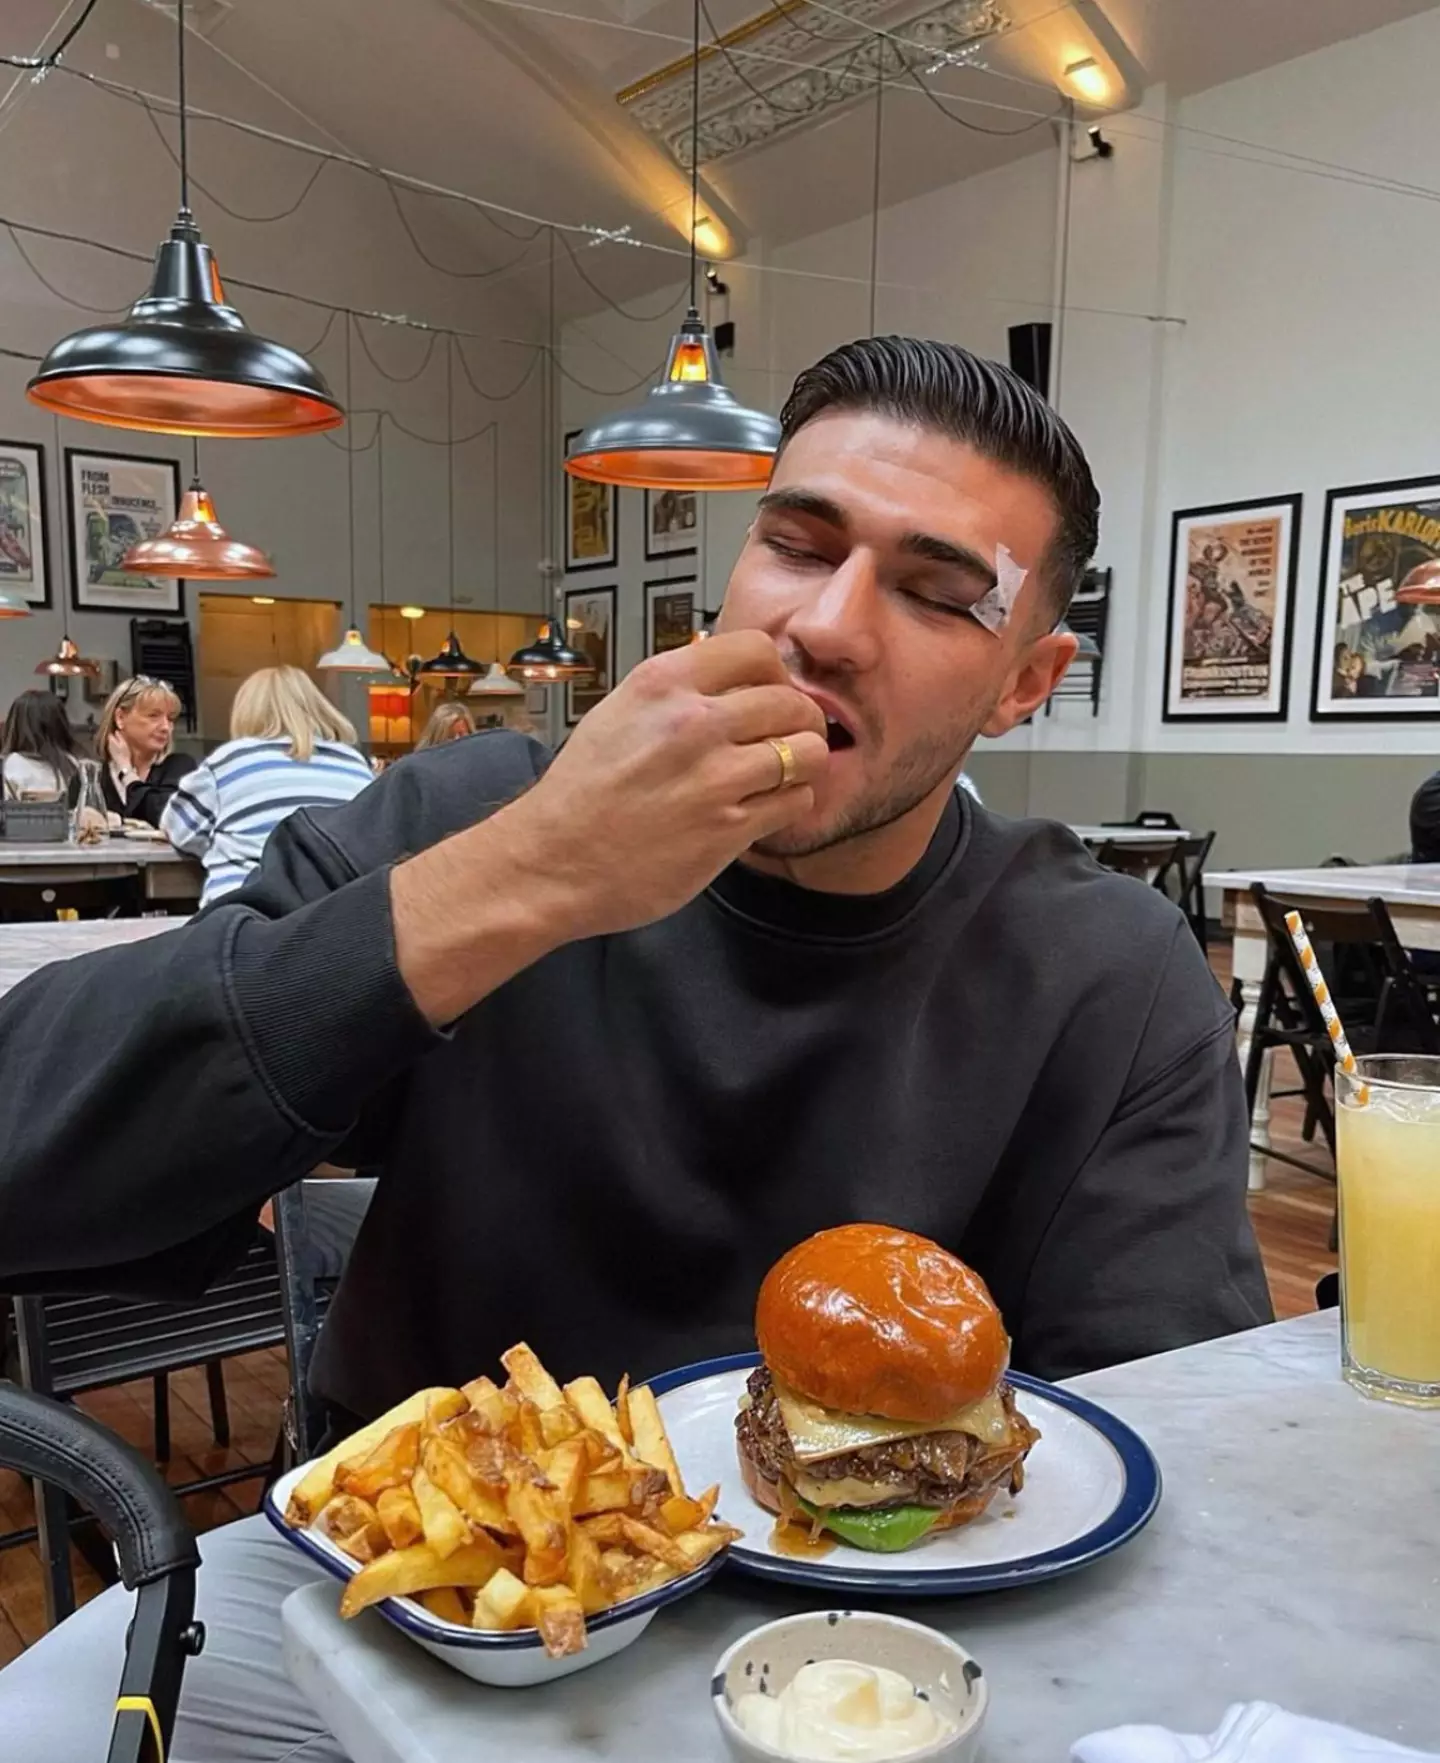 As a professional boxer, eating plenty is very important to Tommy Fury.